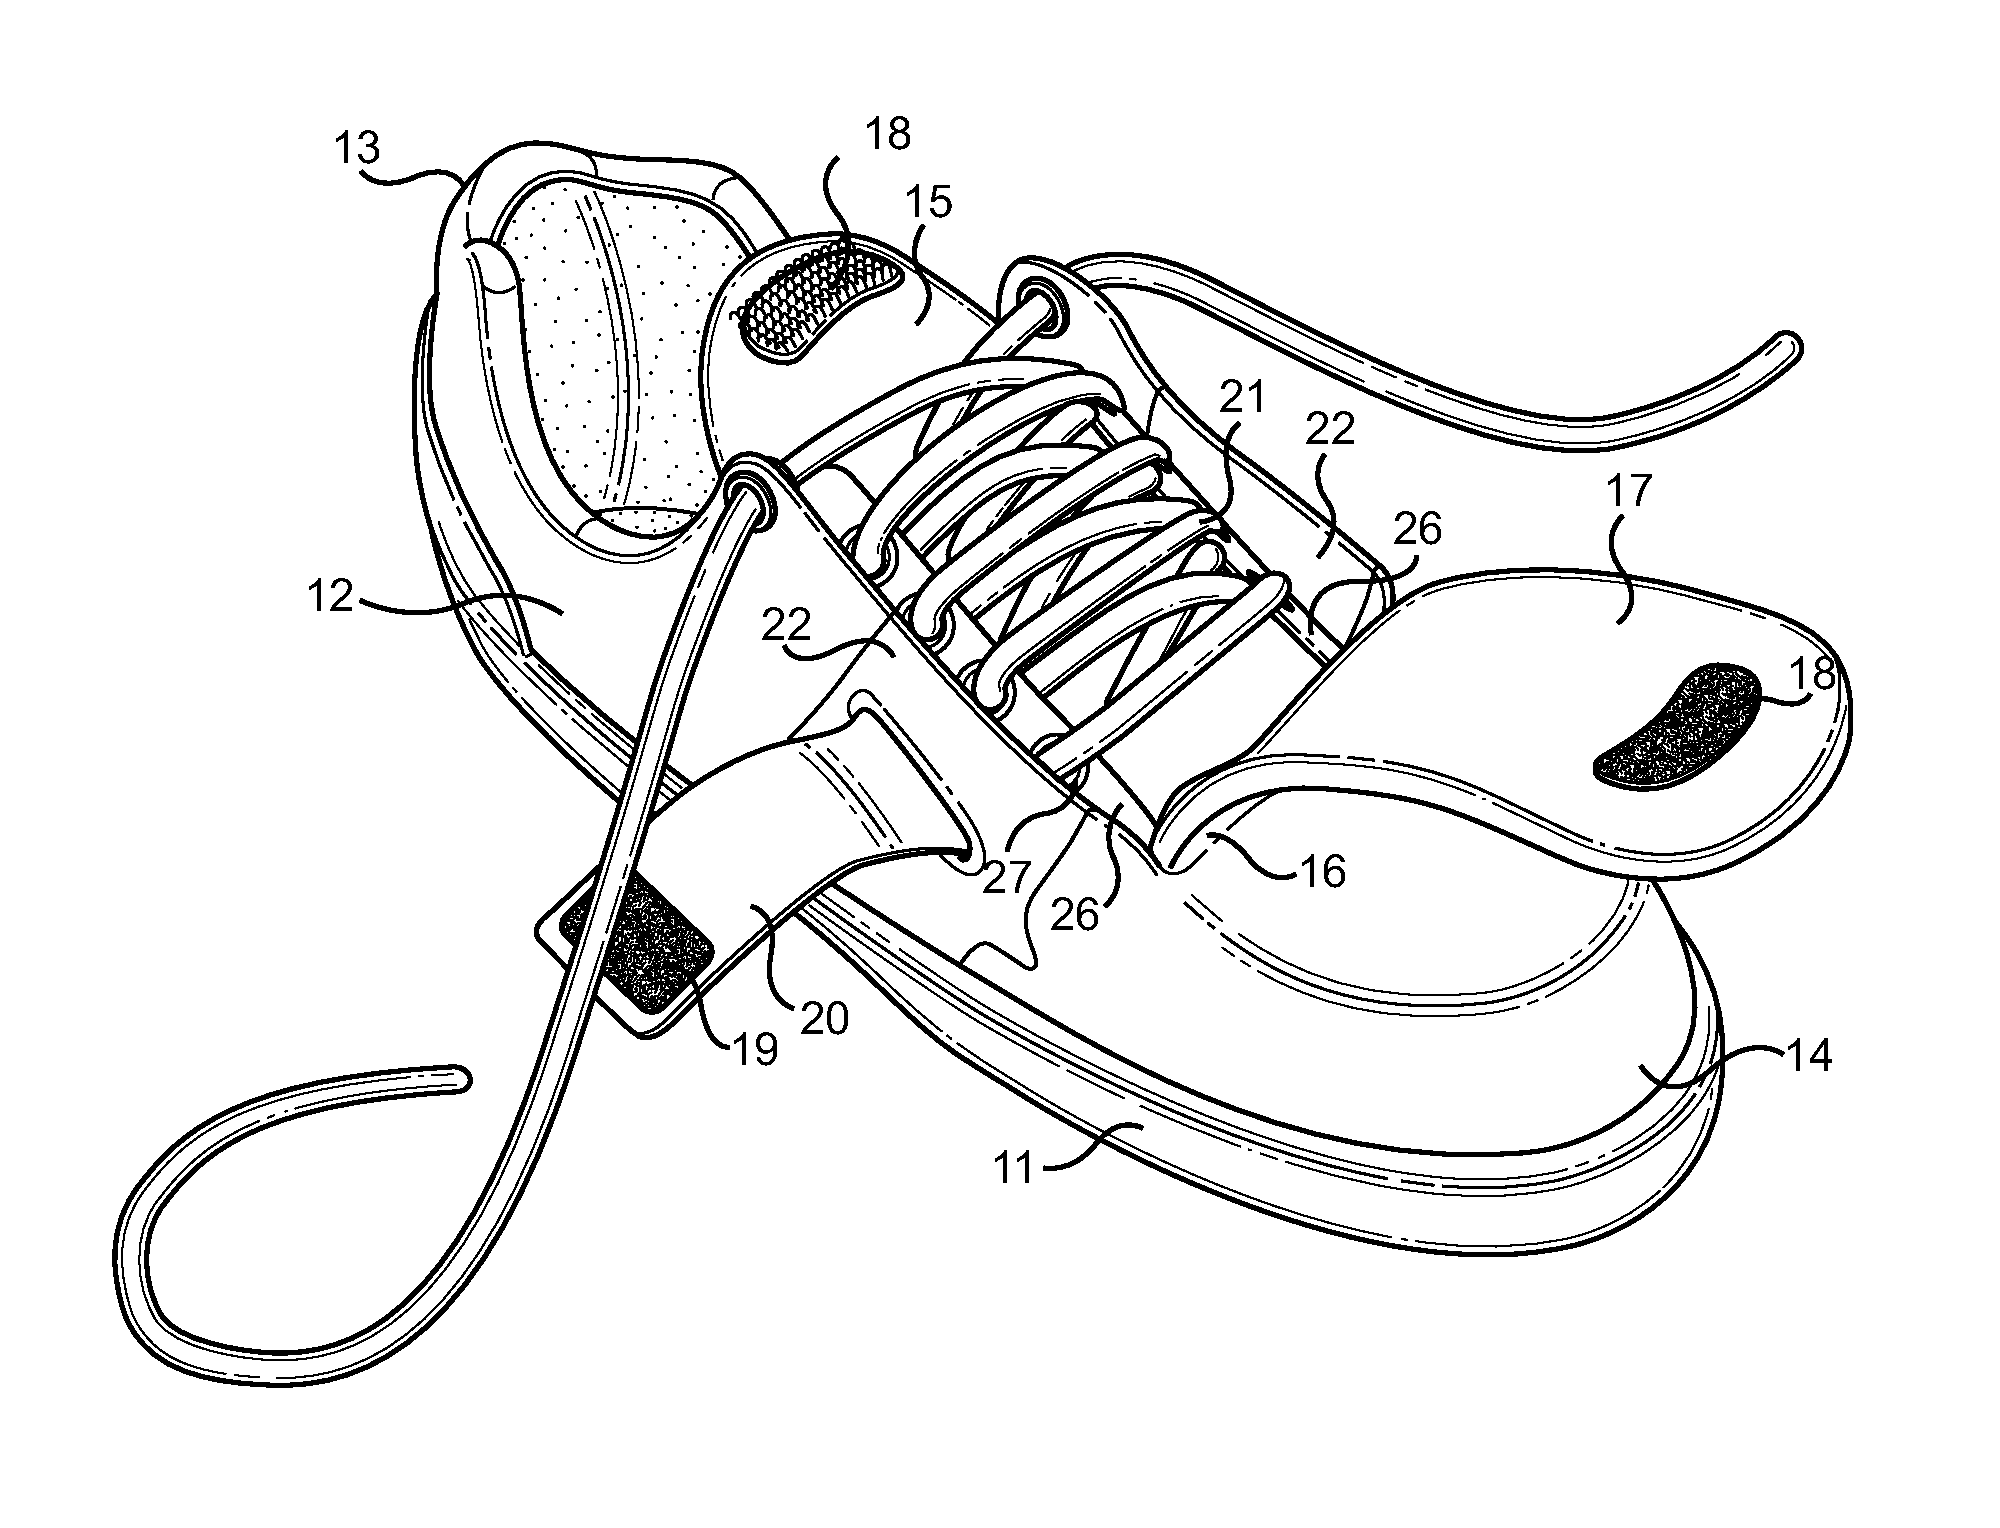 Skate Shoelace Protection Structure having a Continuous Sliding Upper Interface